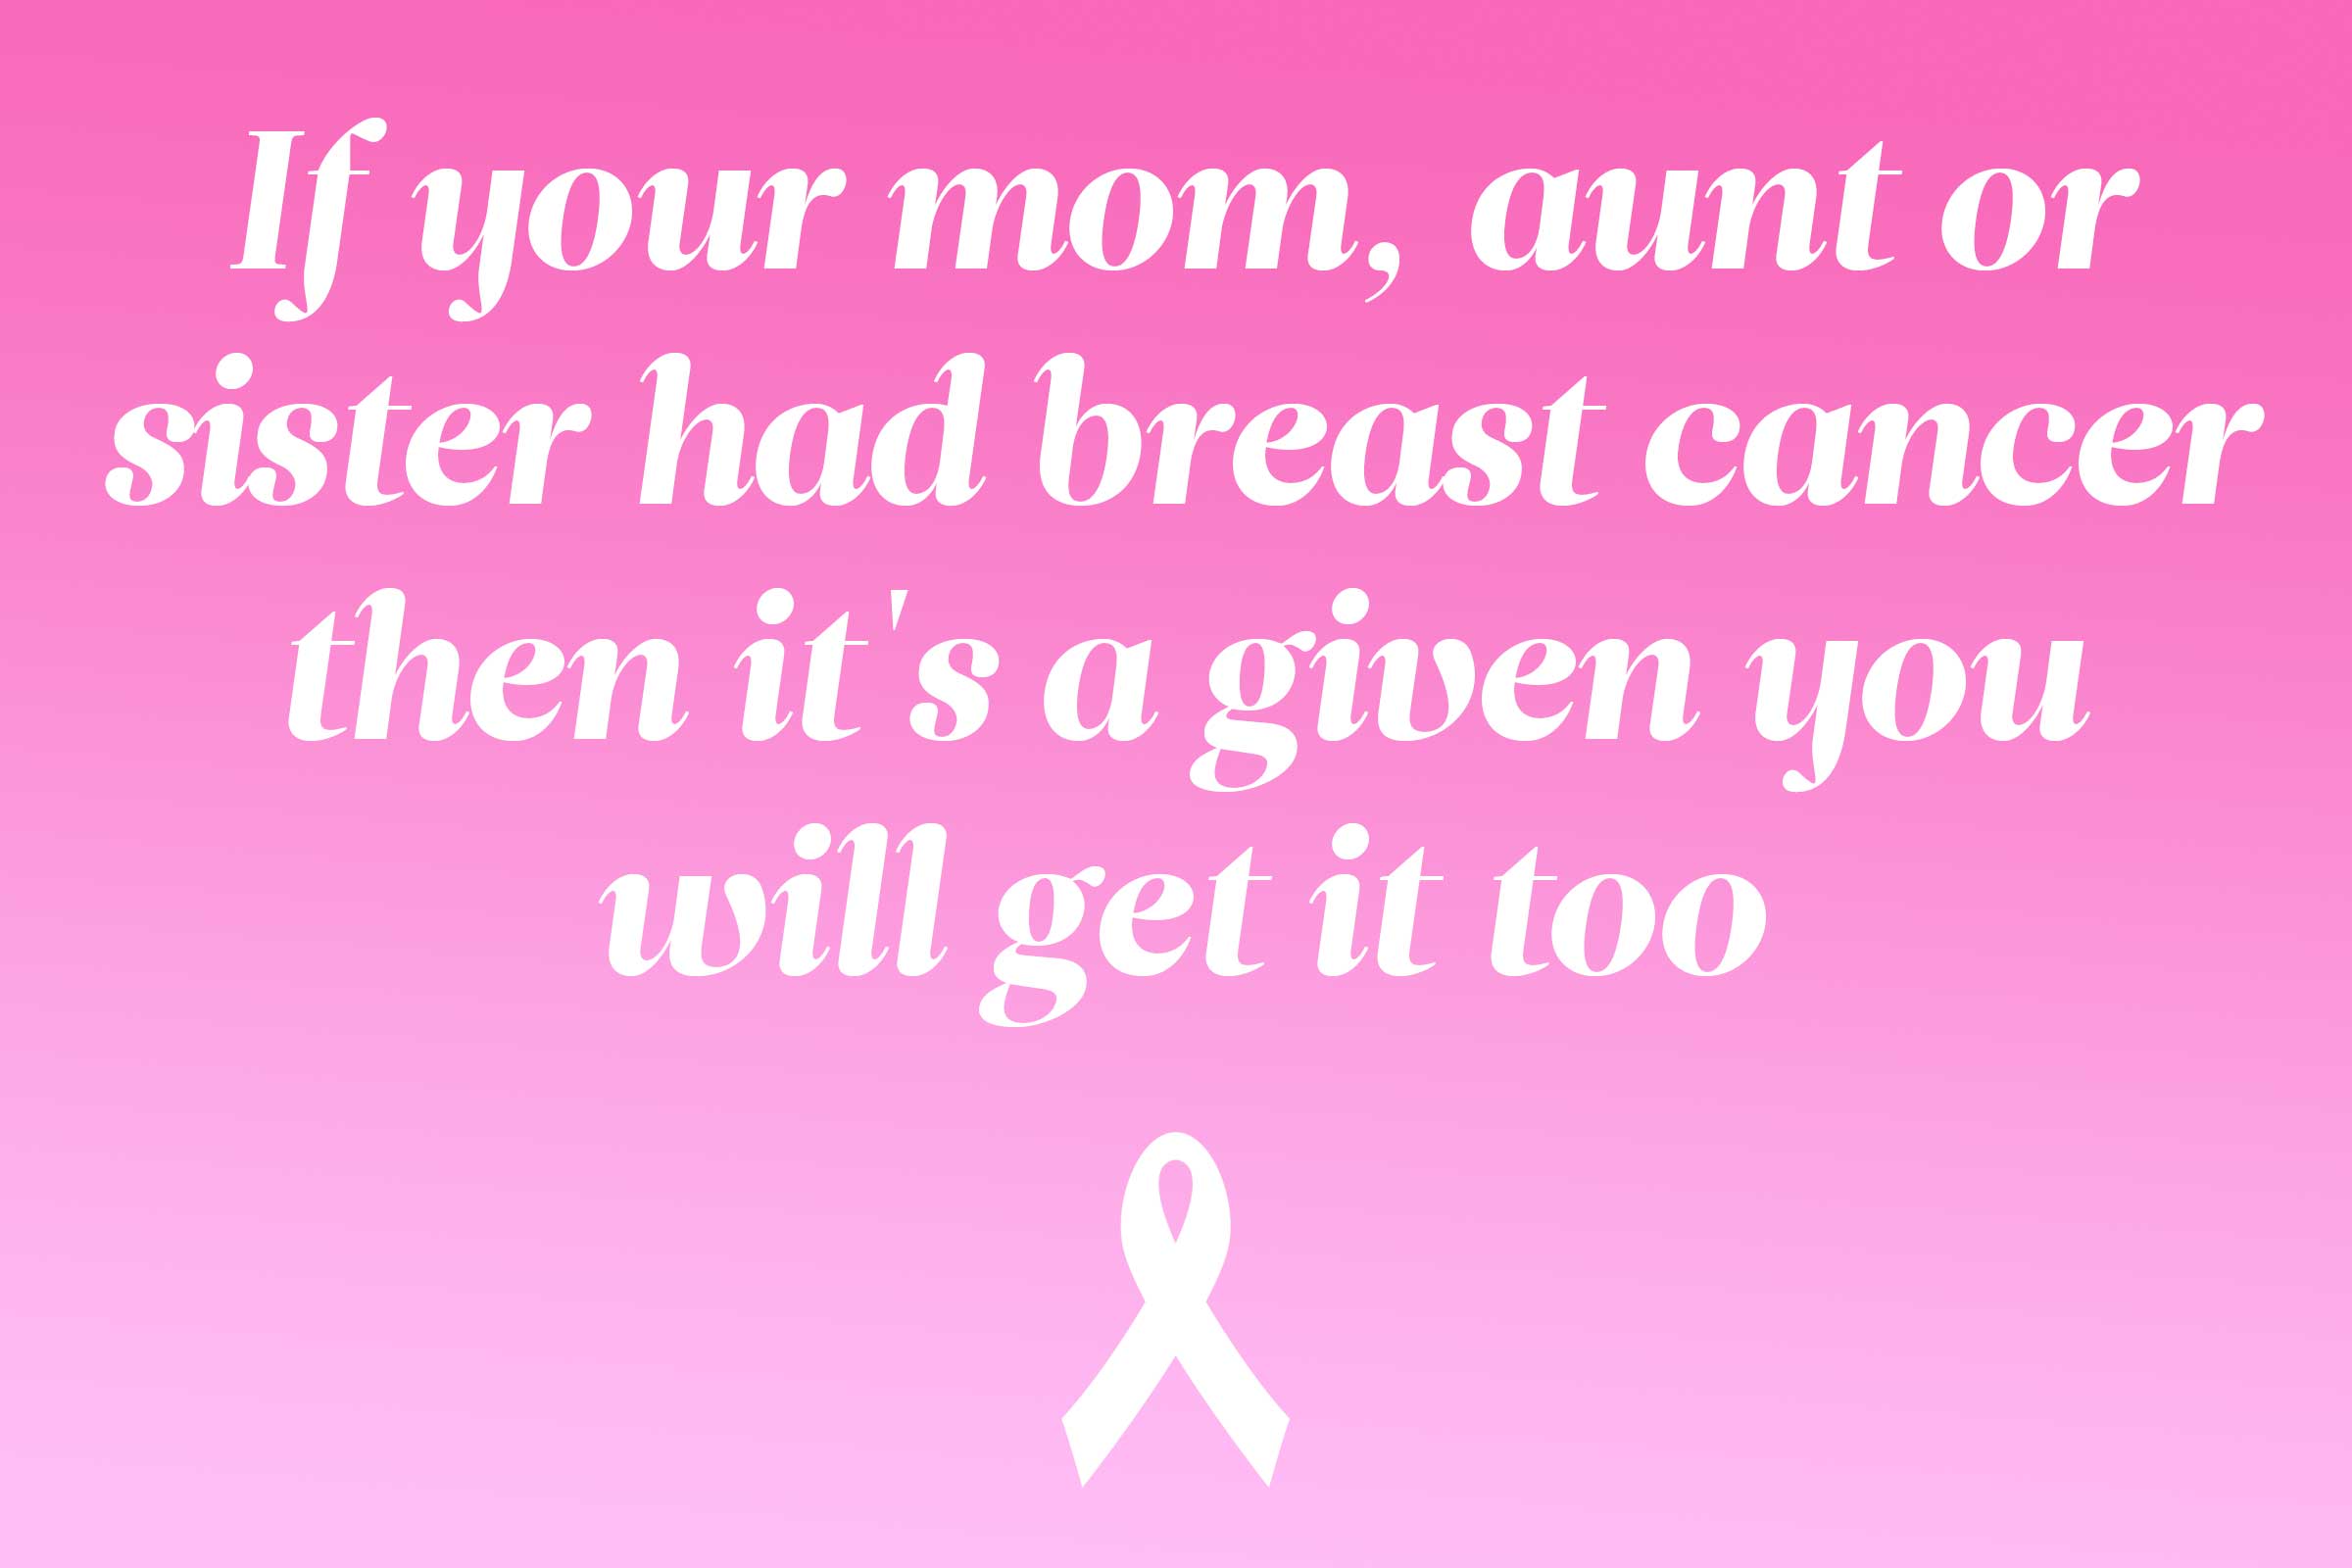 myth: breast cancer is passed within the family